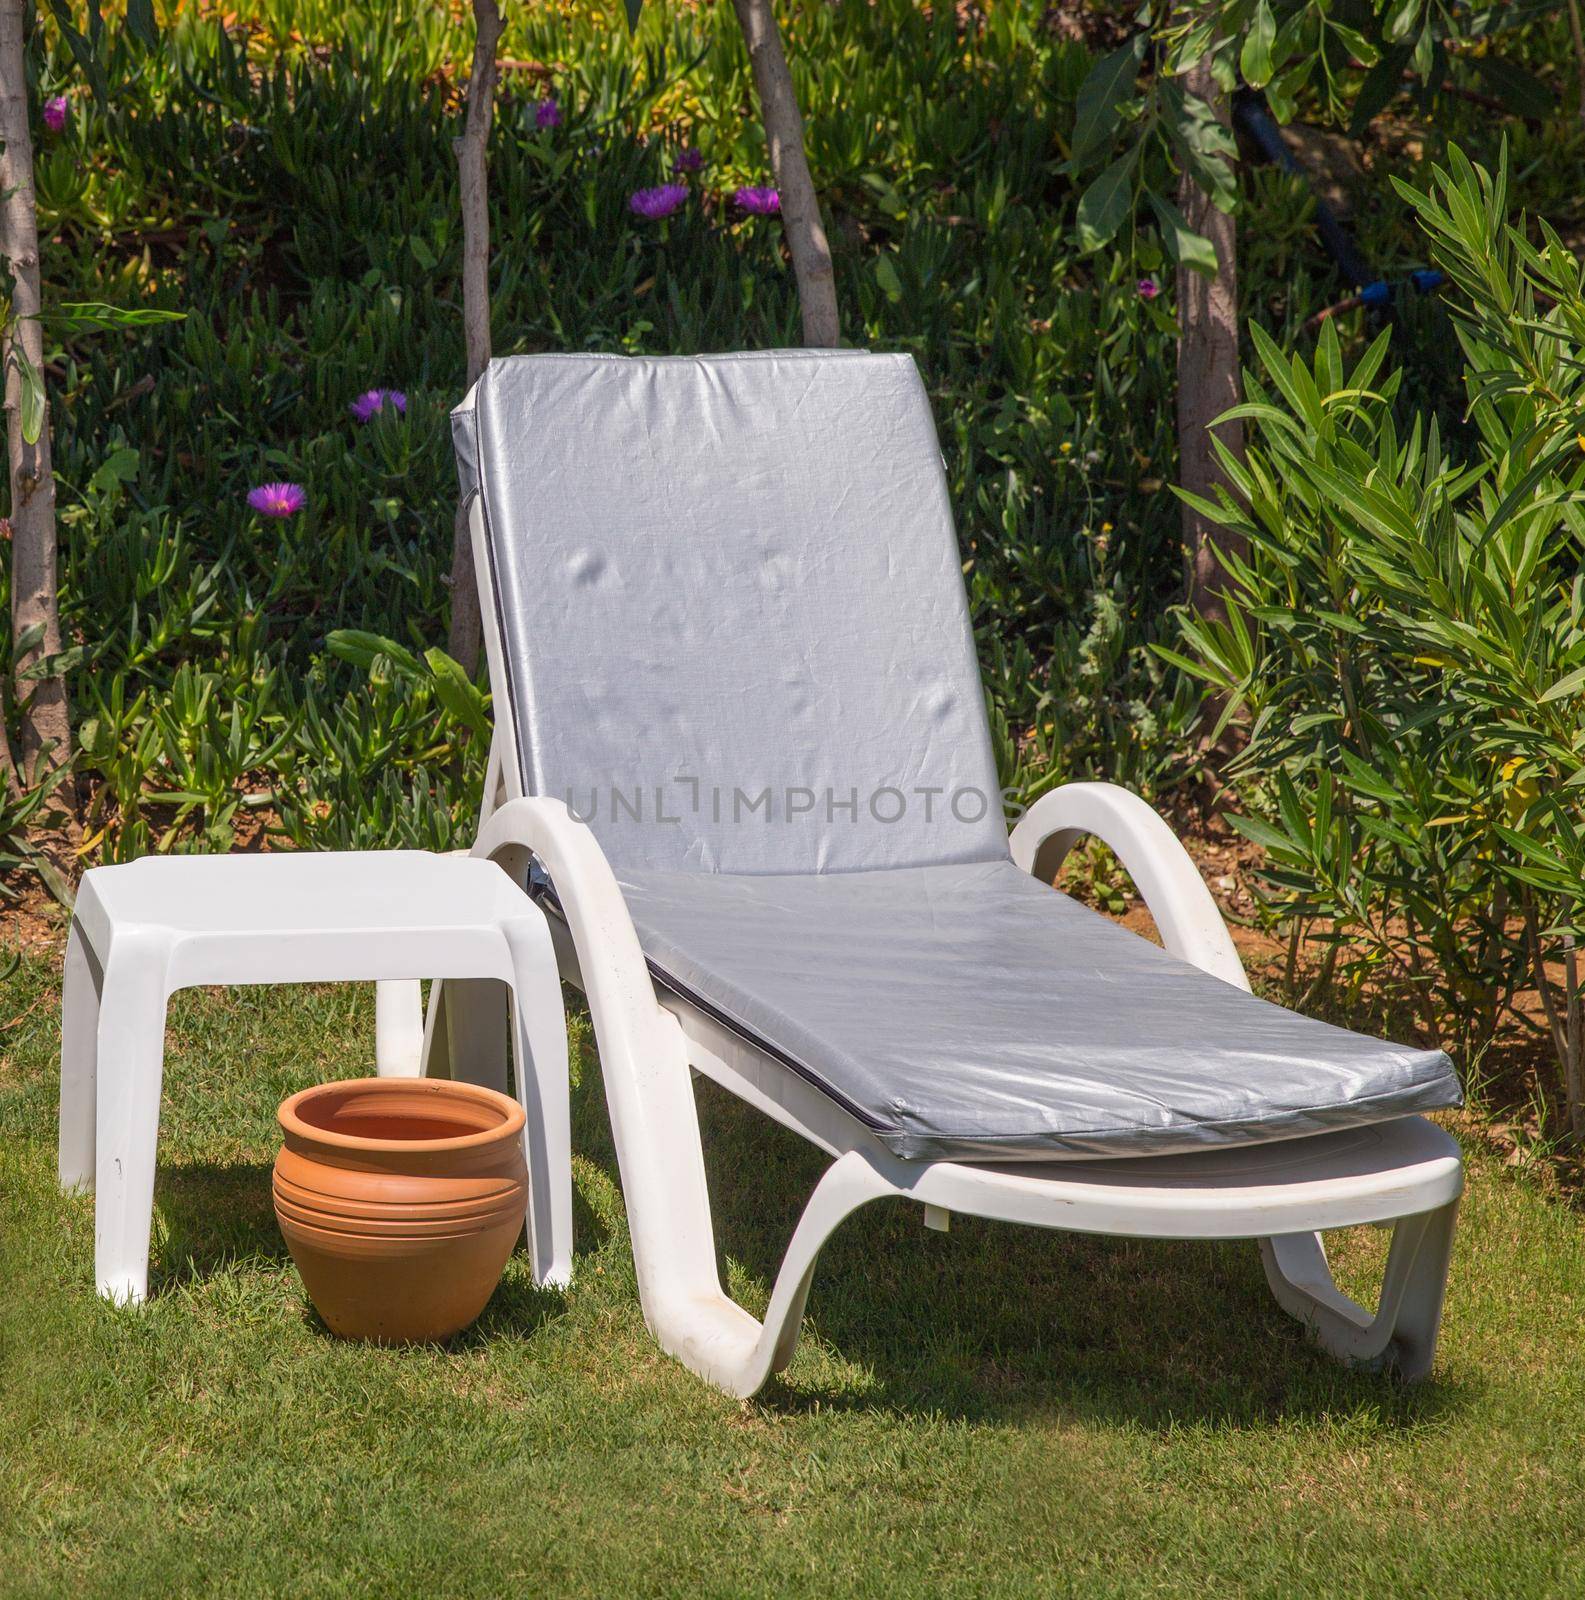 Two comfortable sunbeds with mattress on a lawn